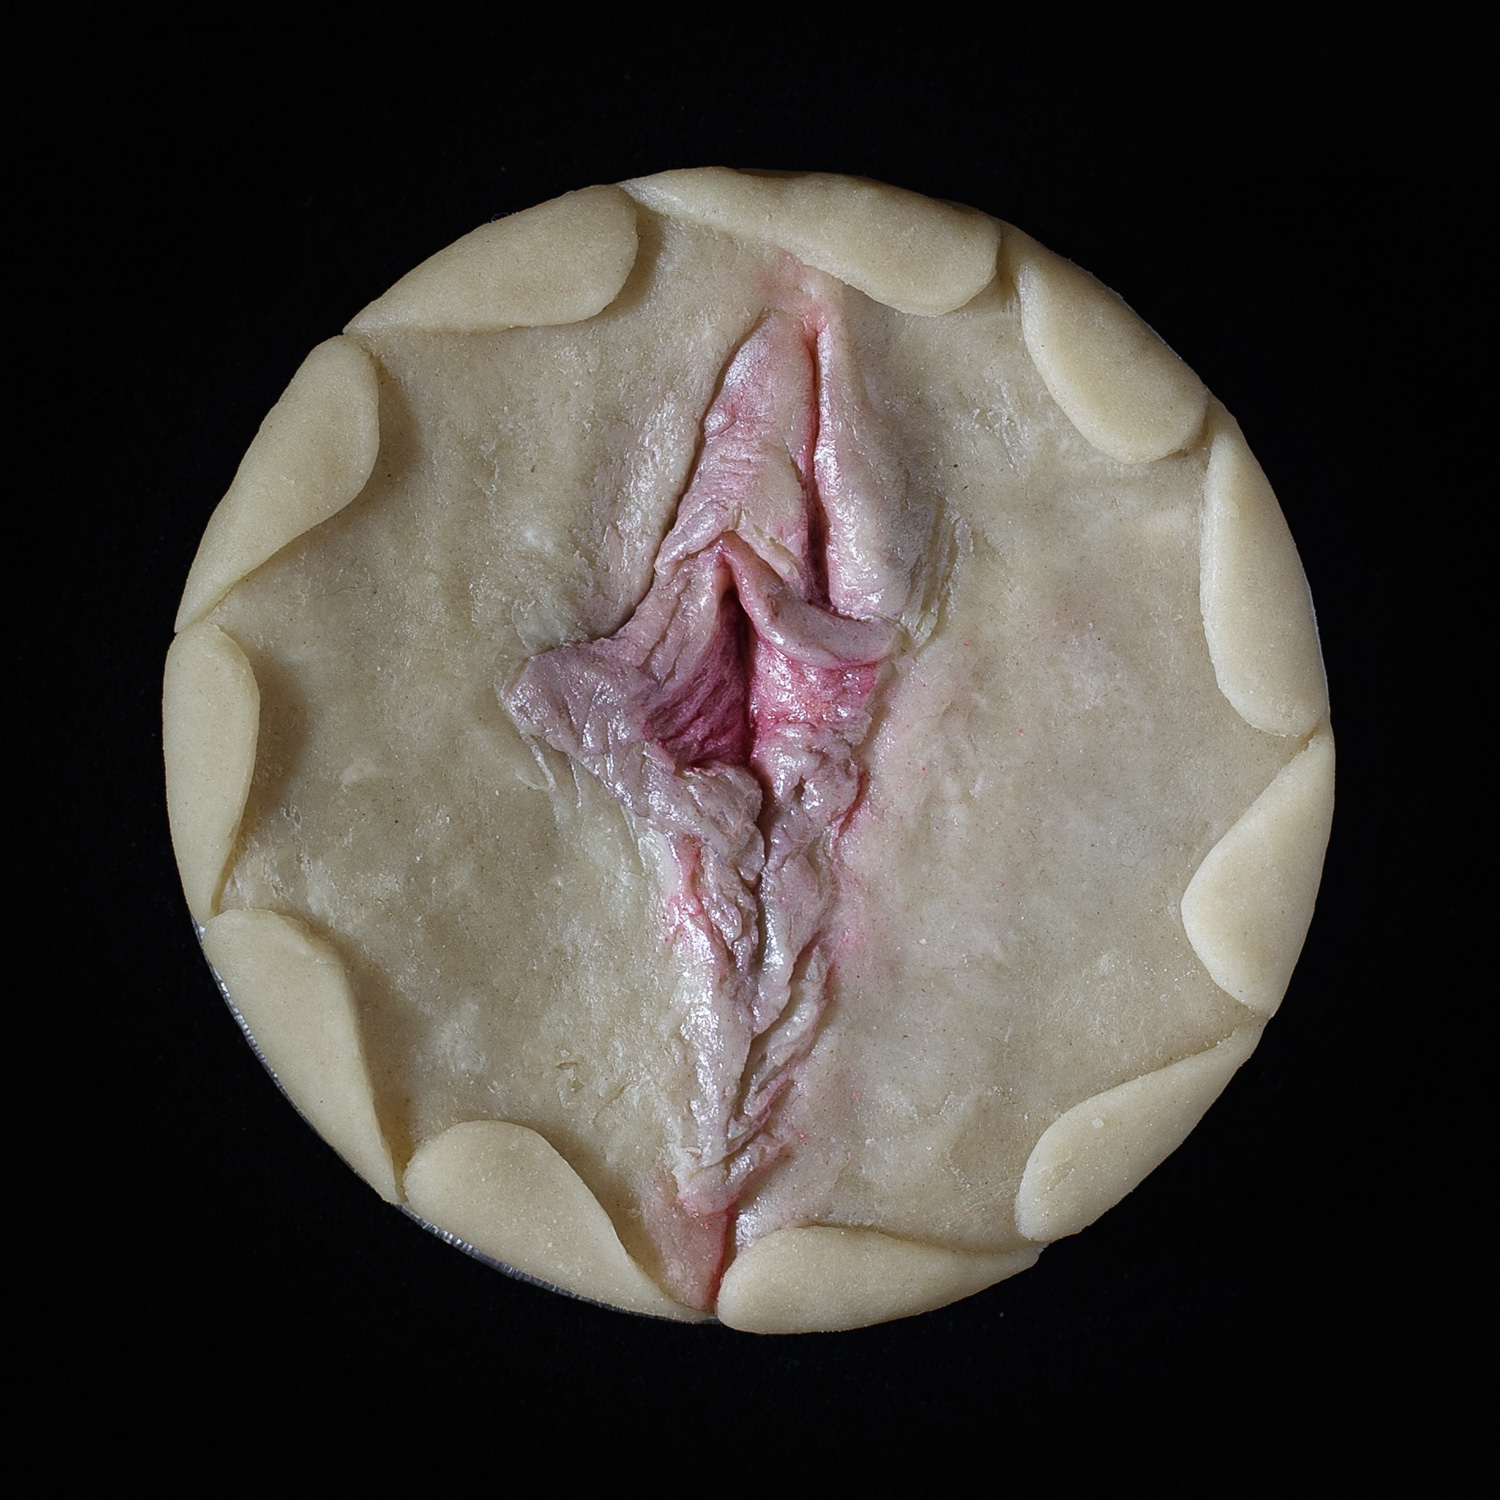 Unbaked pie on a black background. The pie art is made to look like a realist human vulva.